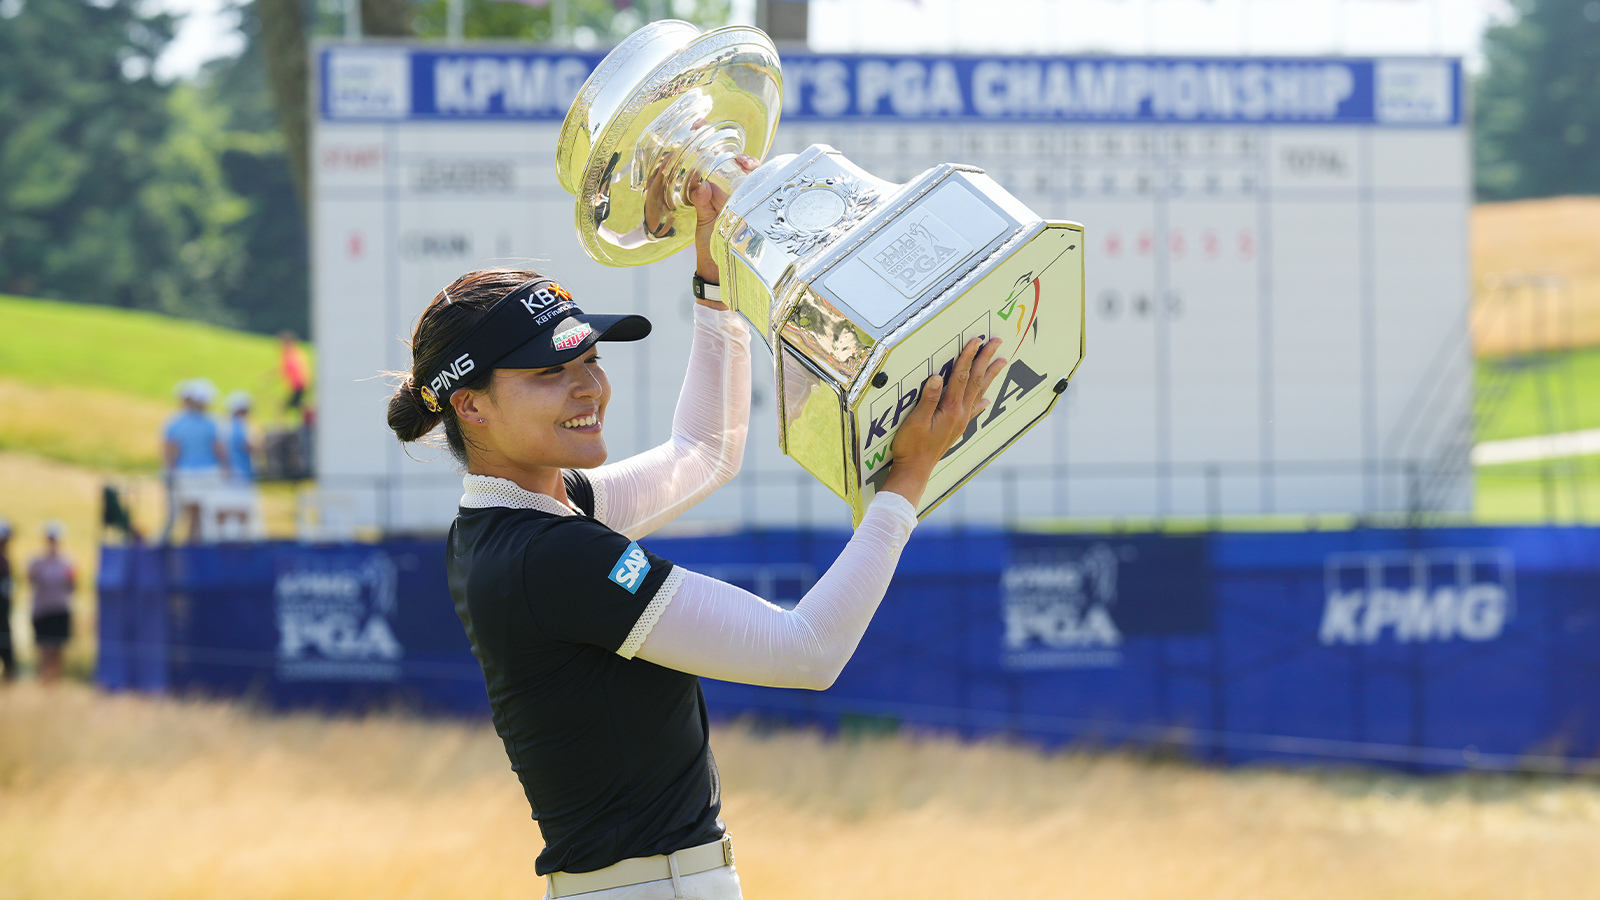 KPMG Women's PGA Champion, In Gee Chun poses with the KPMG Women's PGA Trophy at Congressional Country Club on June 26, 2022 in Bethesda, Maryland.